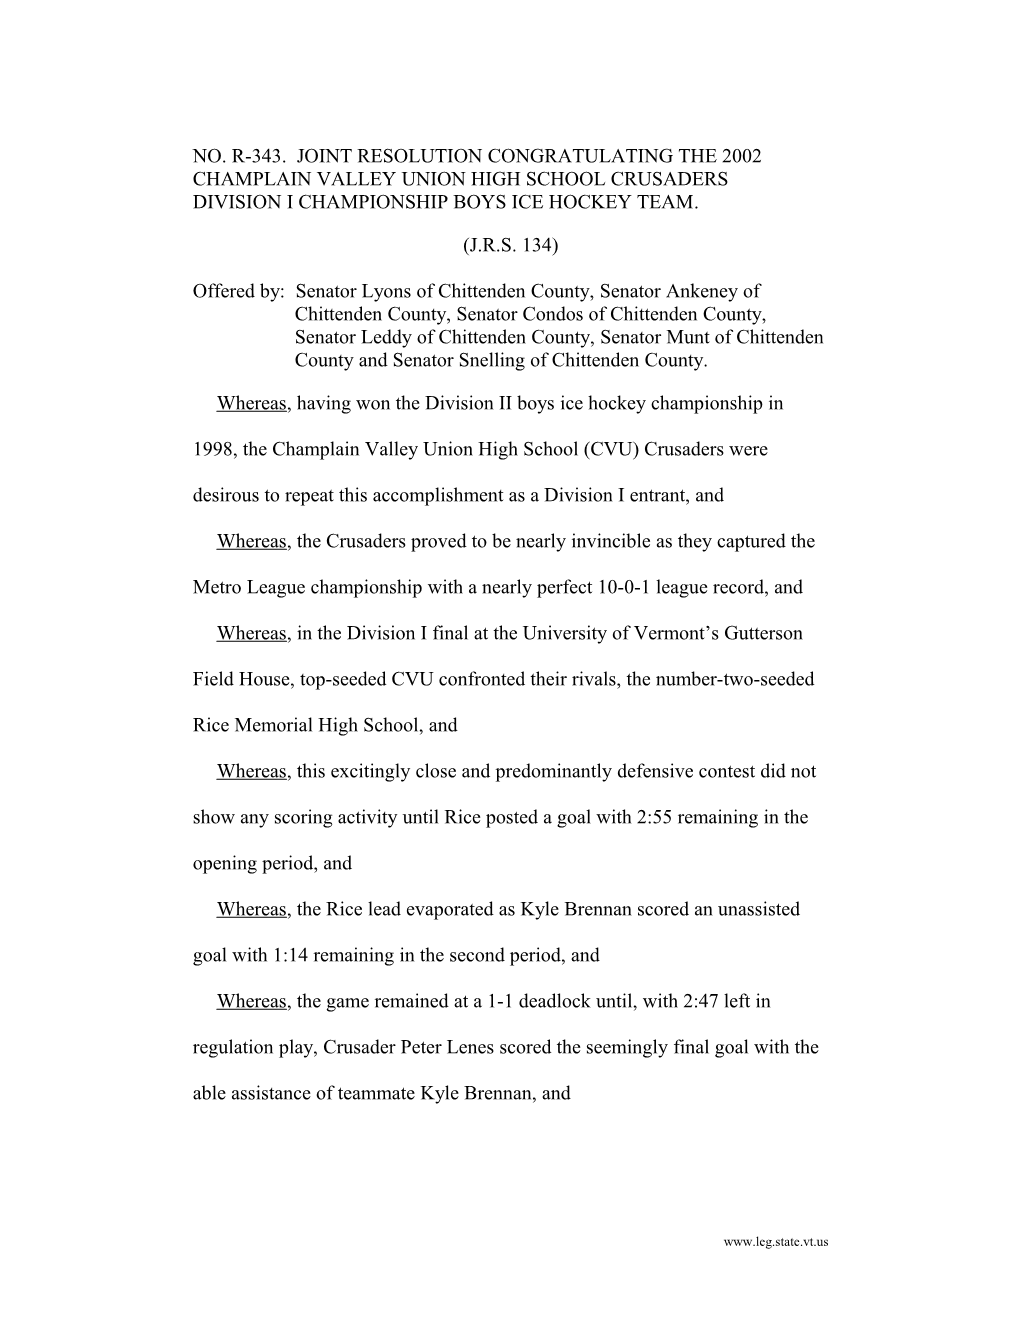 NO. R-343. JOINT RESOLUTION Congratulating the 2002 Champlain Valley Union High School